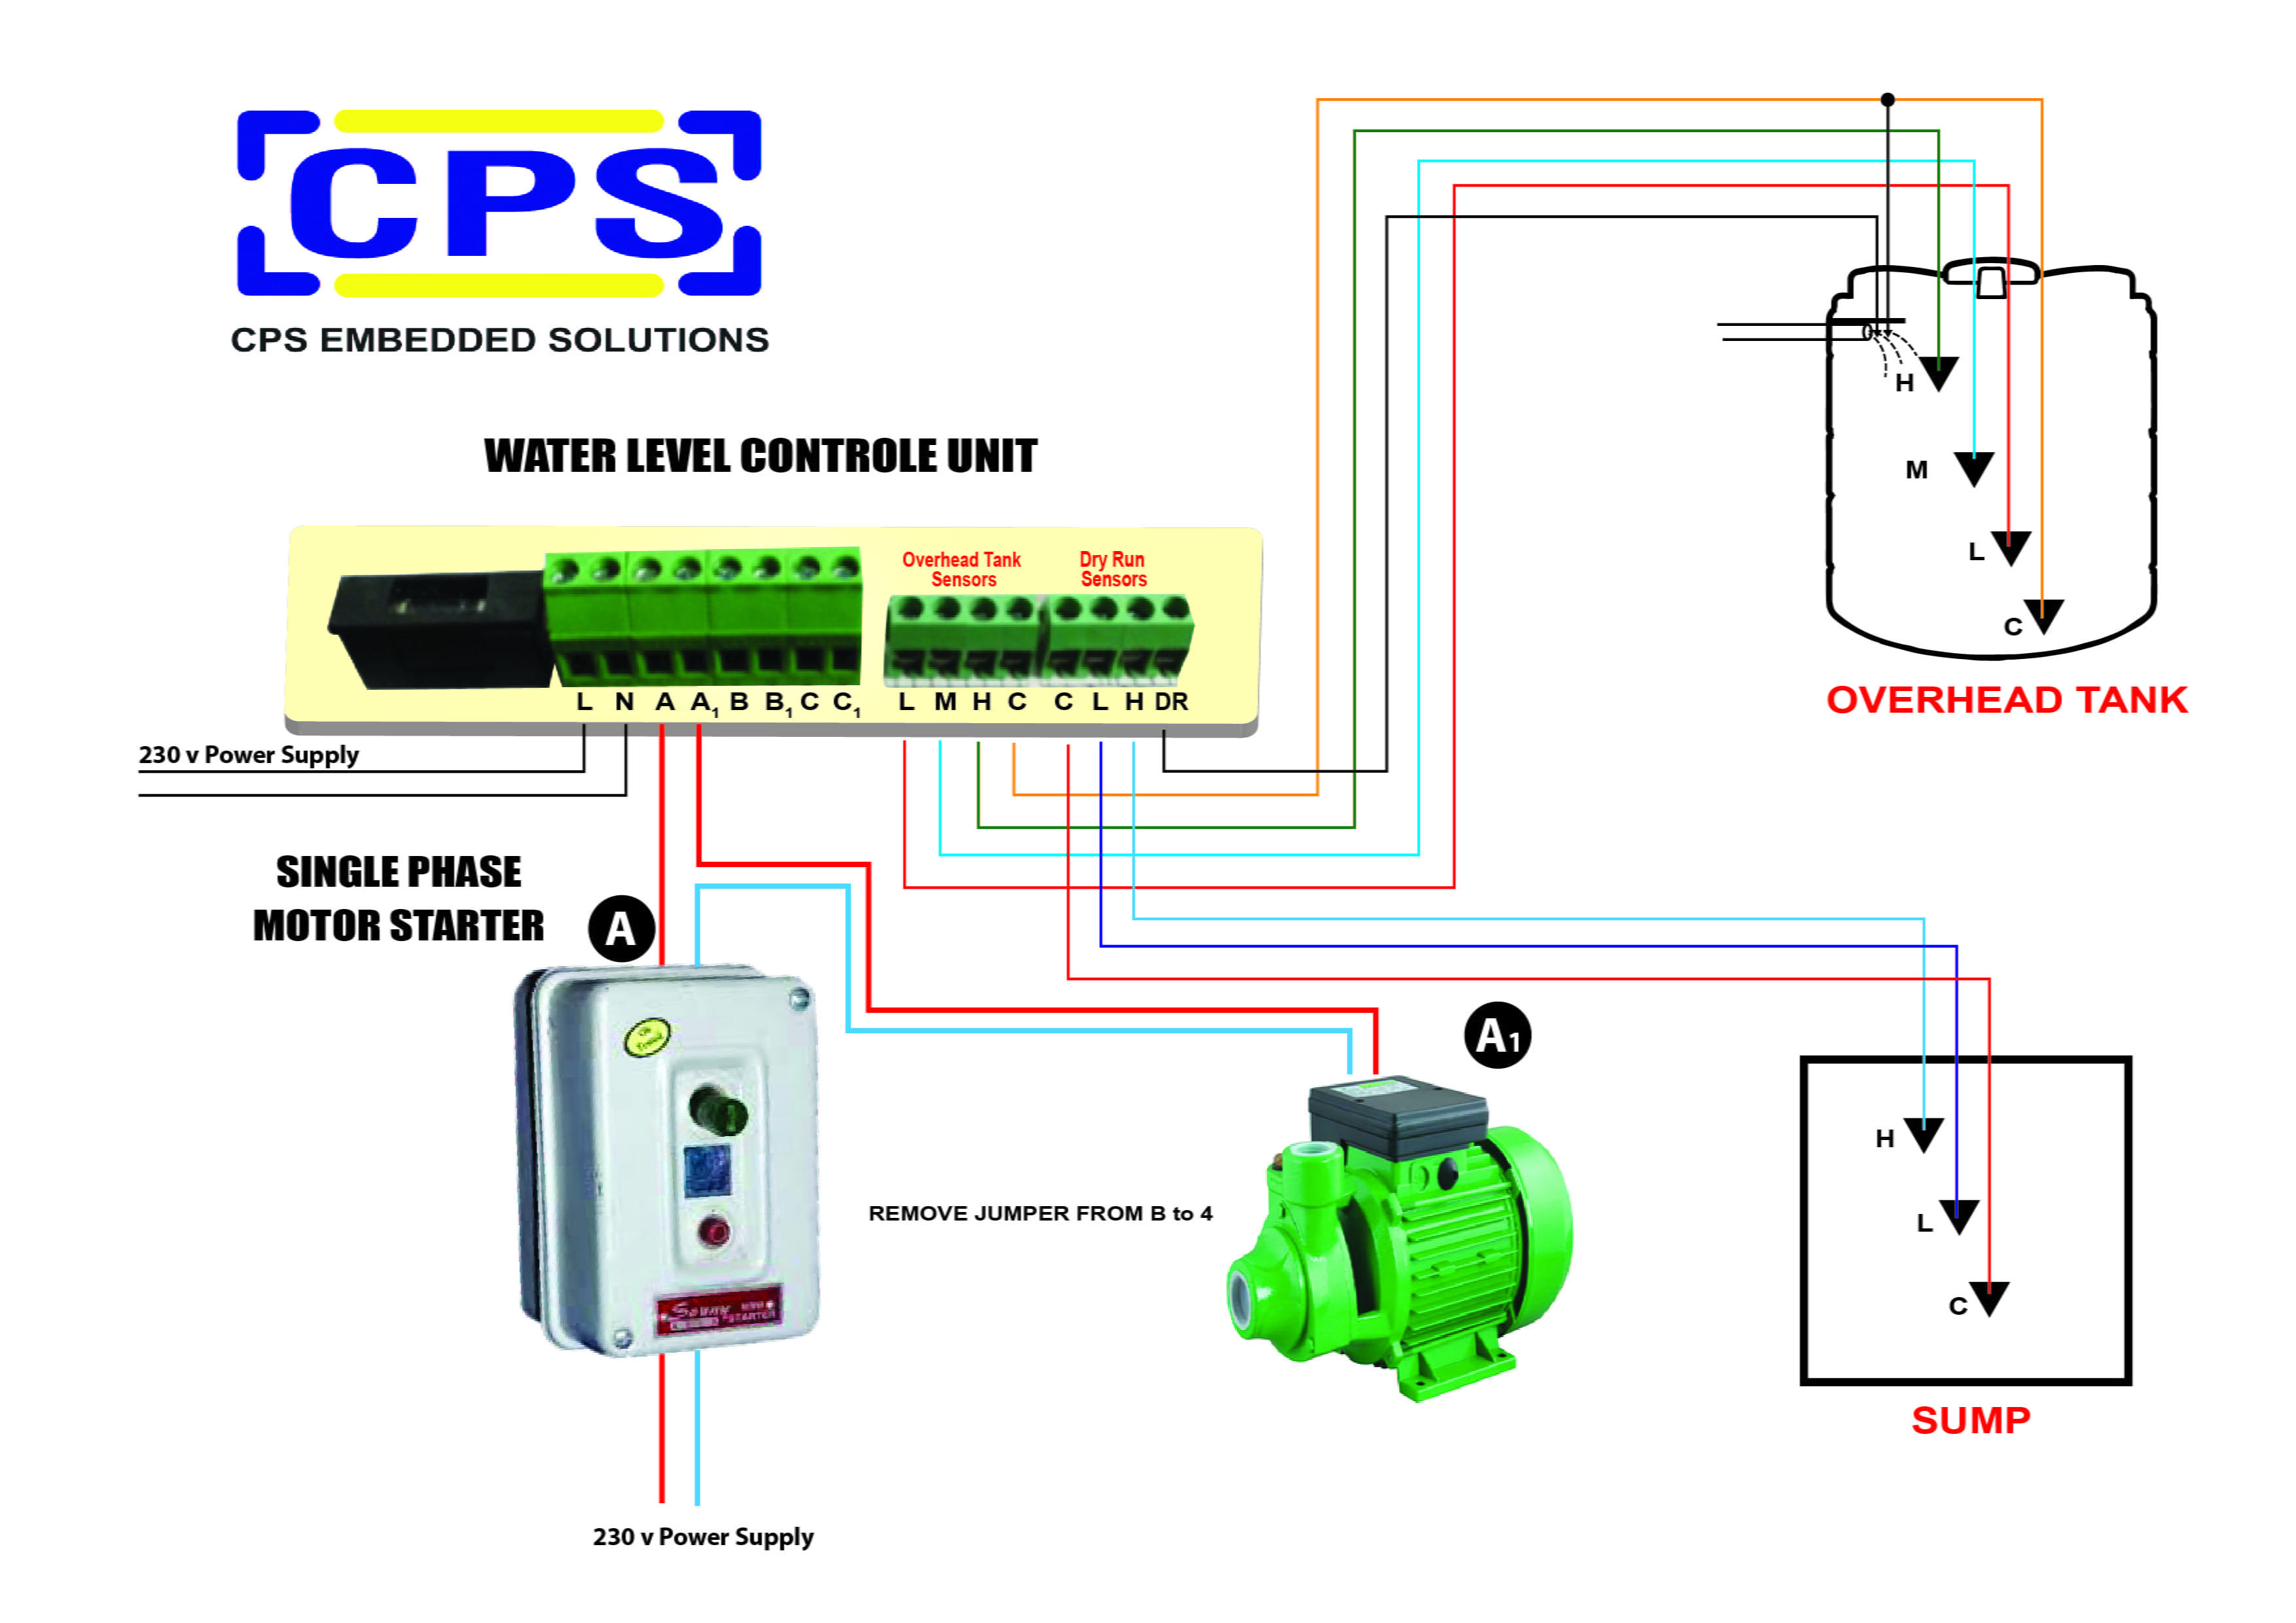 EMBEDDED PRODUCTS - CPS EMBEDDED SOLUTIONS